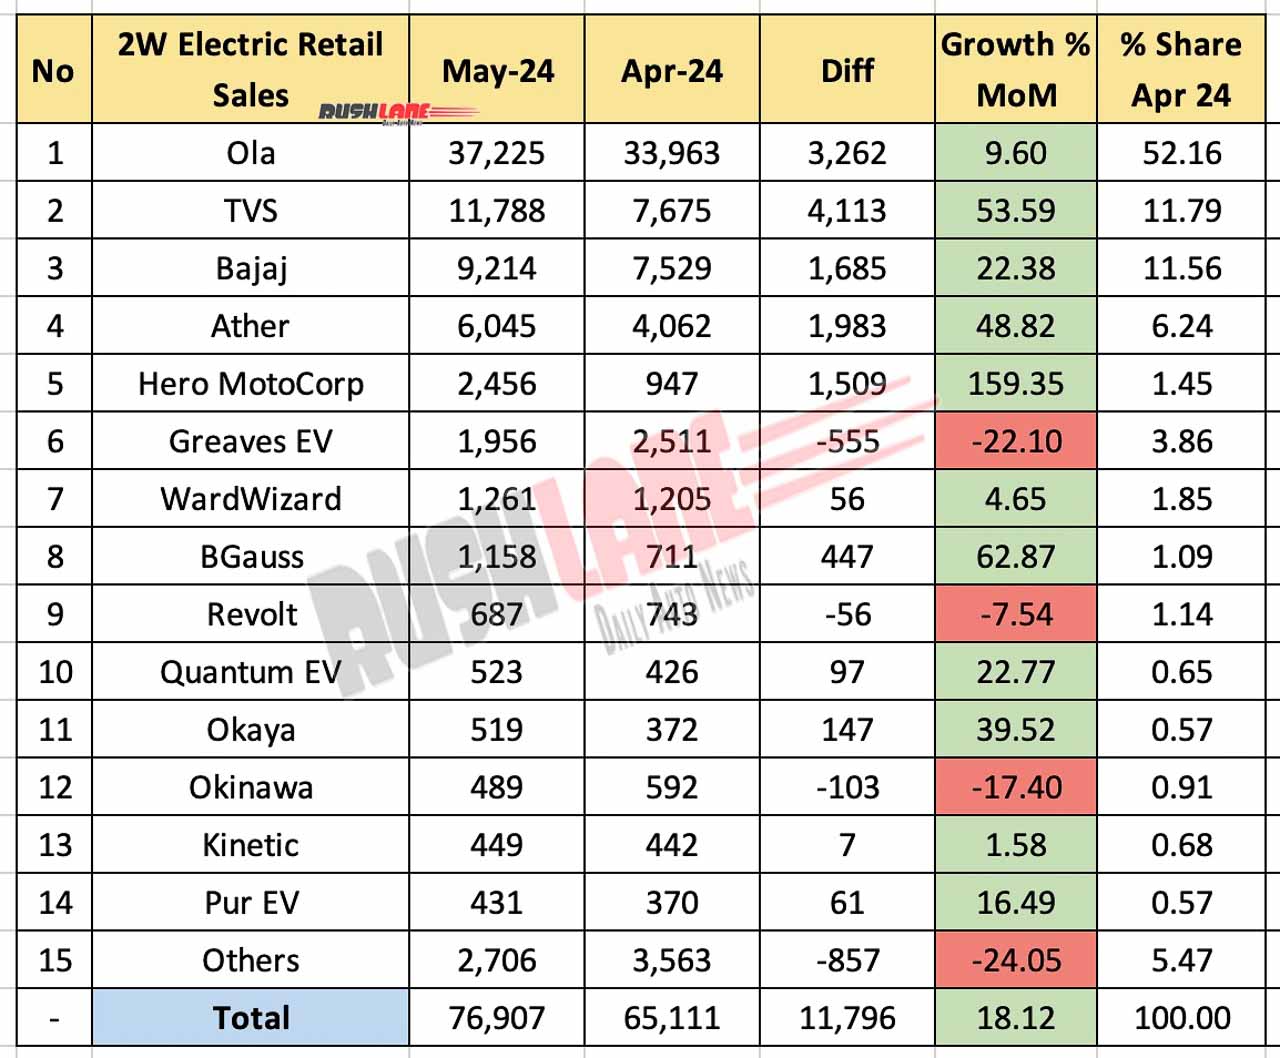 Electric 2W Sales May 2024 - MoM Comparison